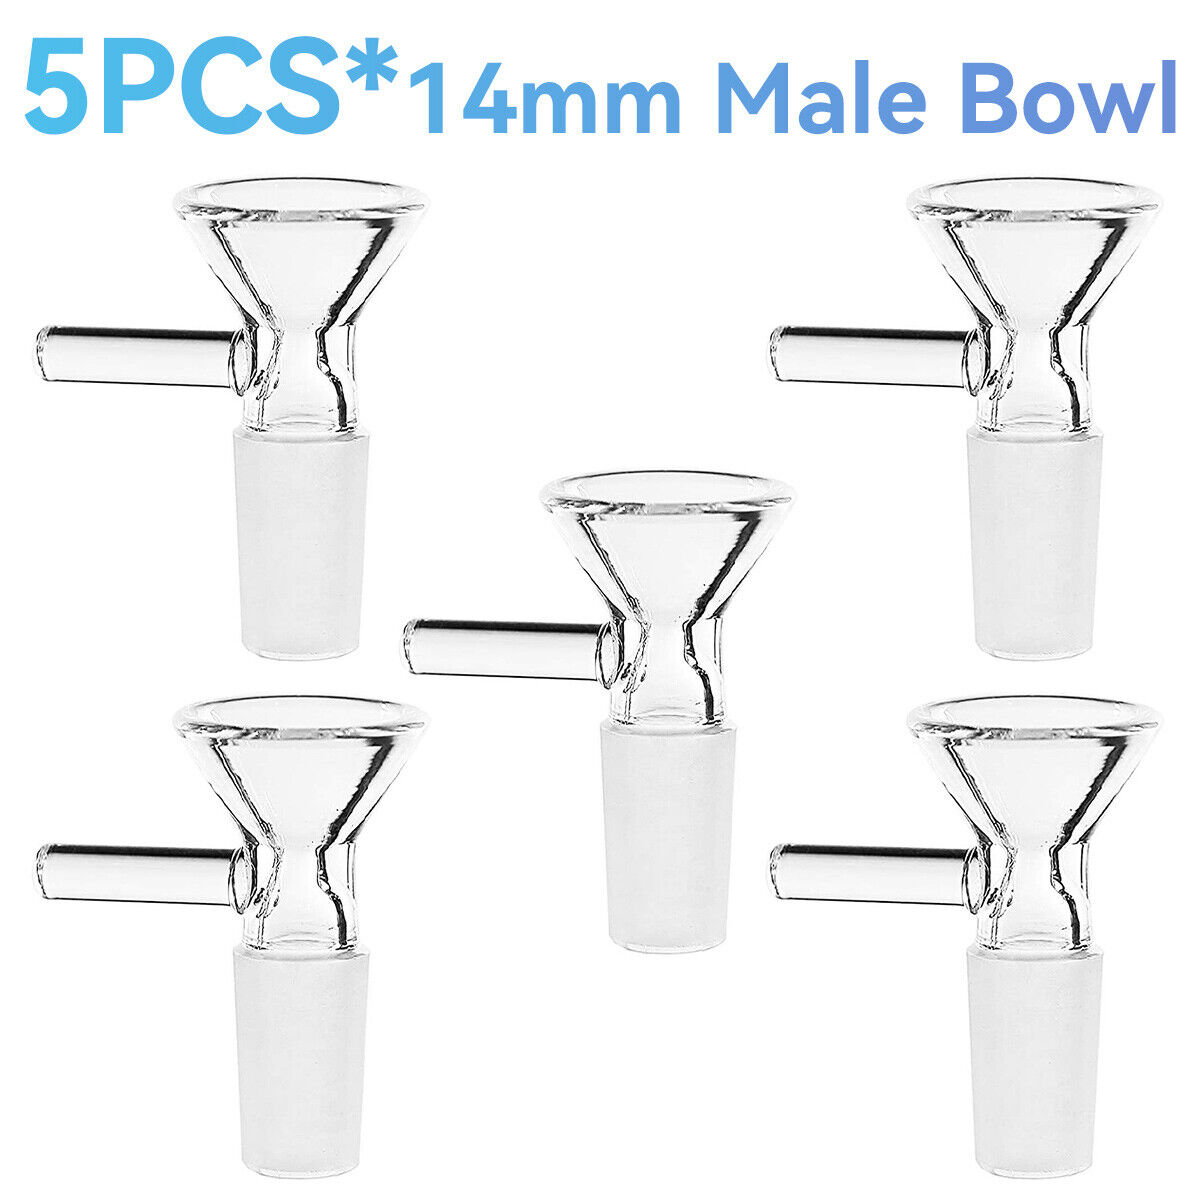 5x 14MM Replacement Head Male Smoking Glass Bowl For Water Pipe Hookah Bong